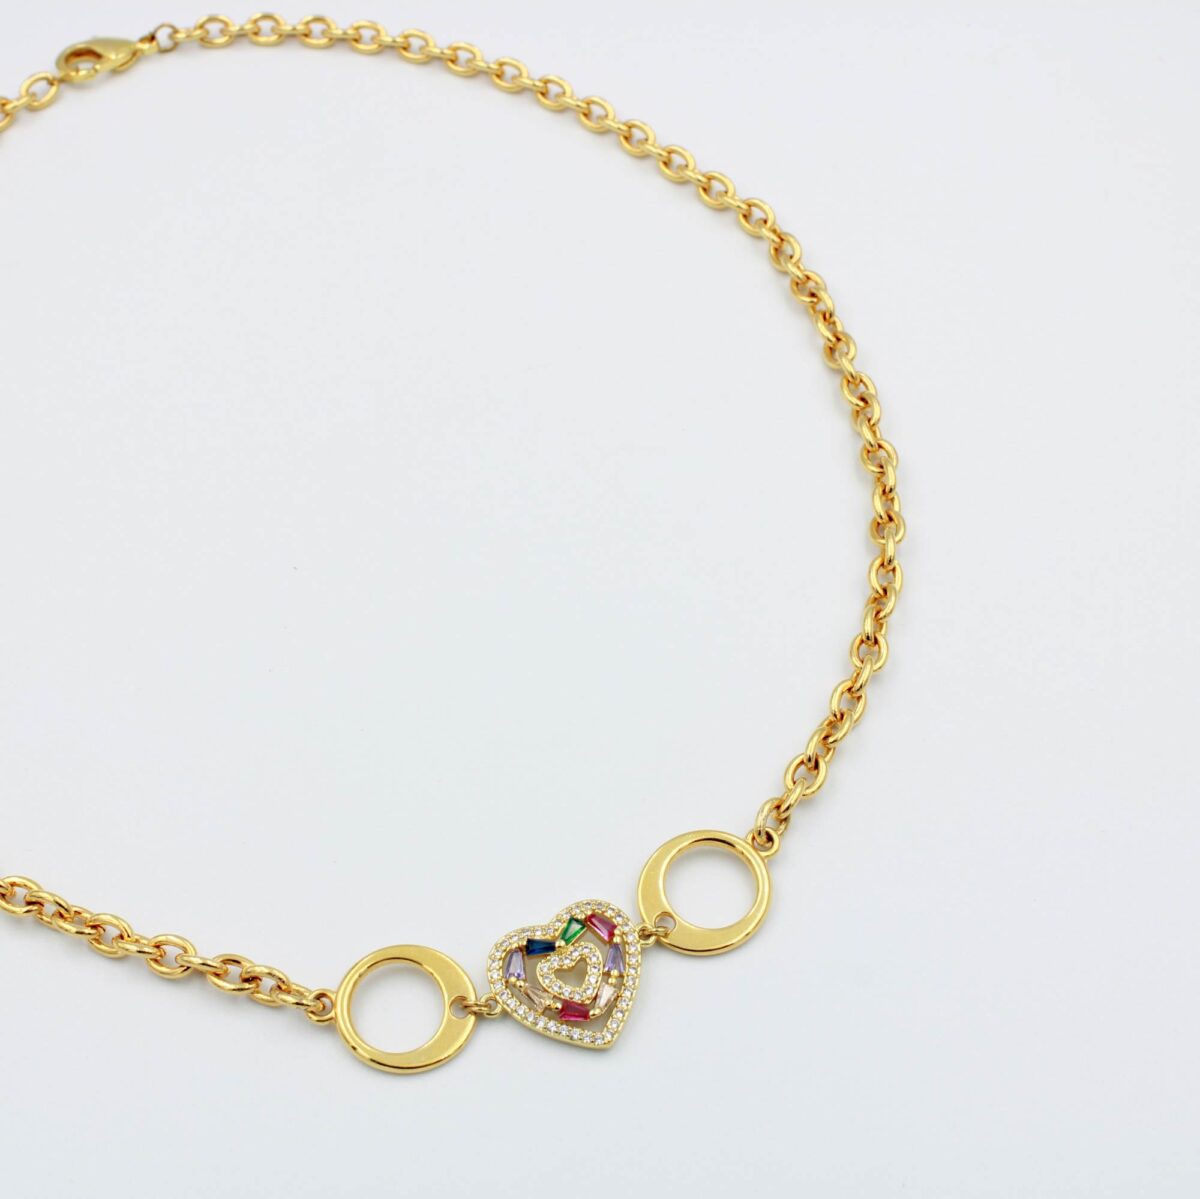 Necklace with Gold Plated Heart and Colorful Zircon Stones